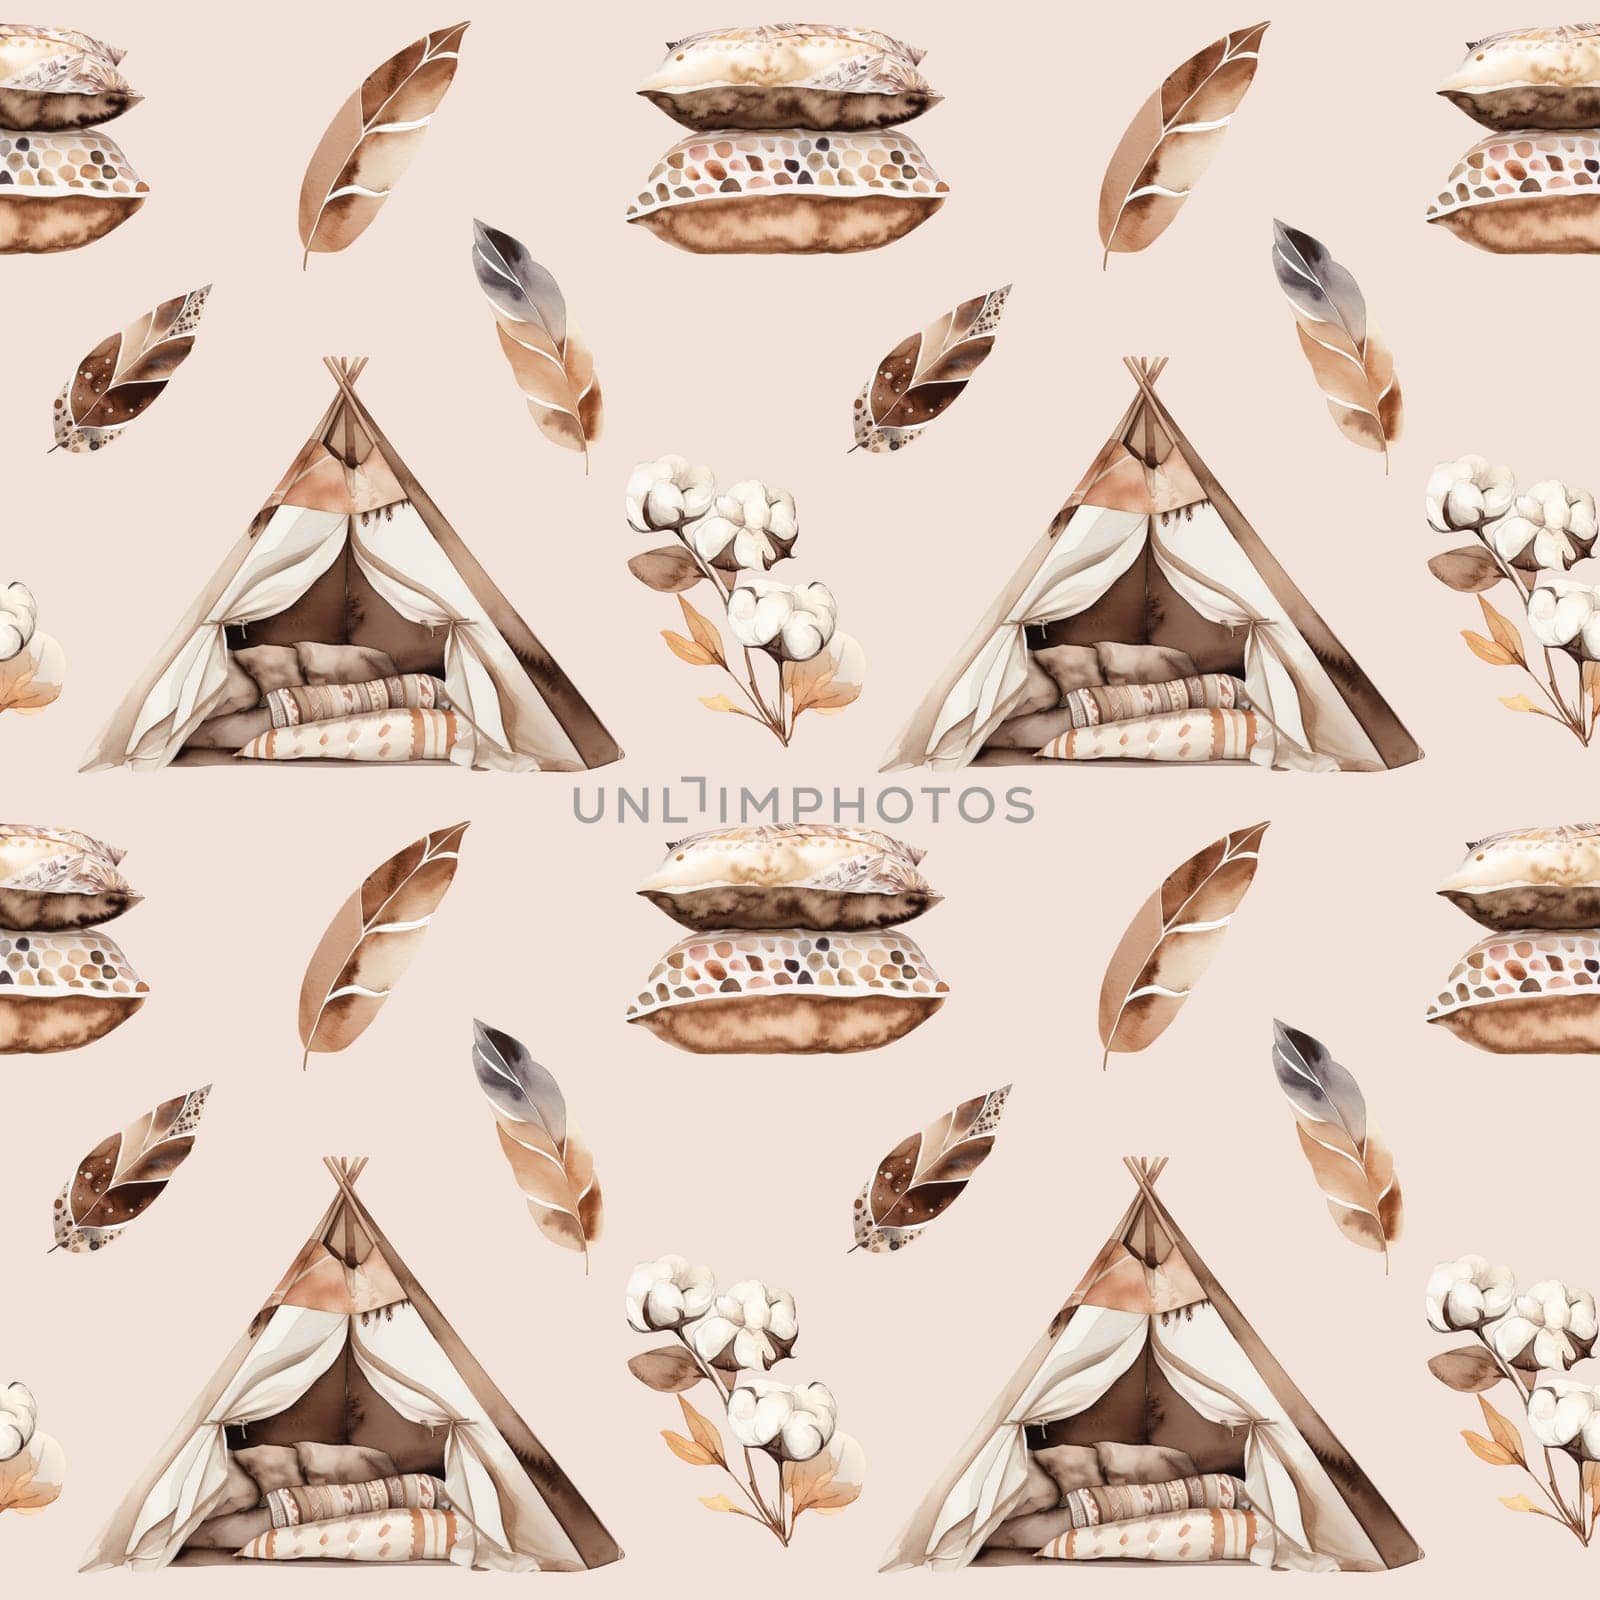 Boho Style Watercolor Illustration Of Wigwams And Decor In A Seamless Pattern, Isolated On A White Background